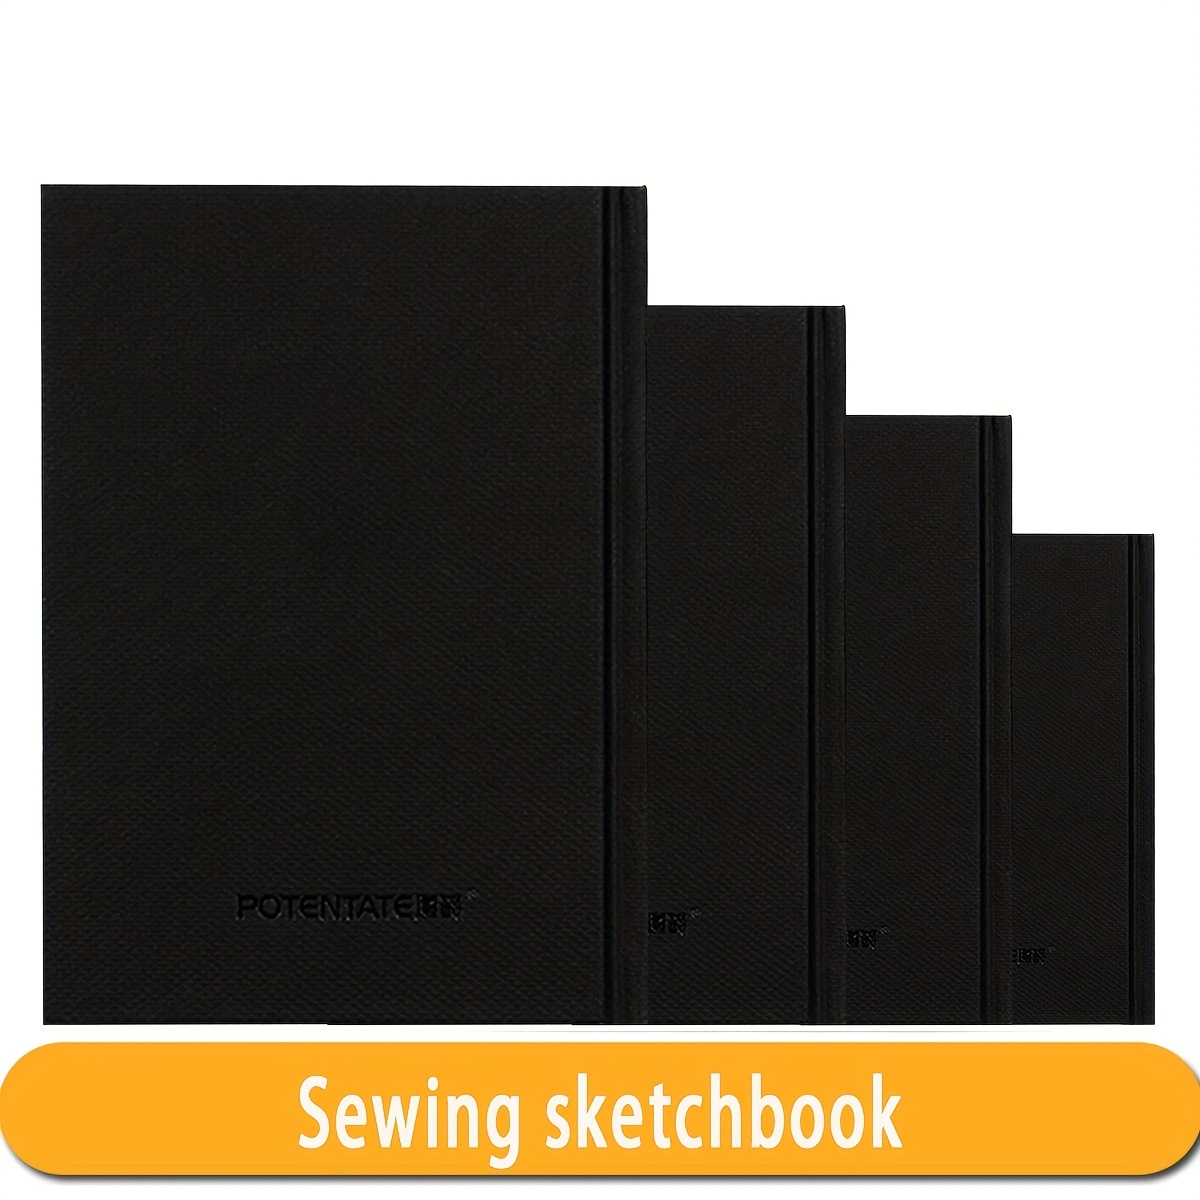 Complete Bookbinding Kit Make Your Own Journal Book With Supplies Tools,  Instruction Booklet & Video Tutorial, Book Binding DIY Sketchbook 